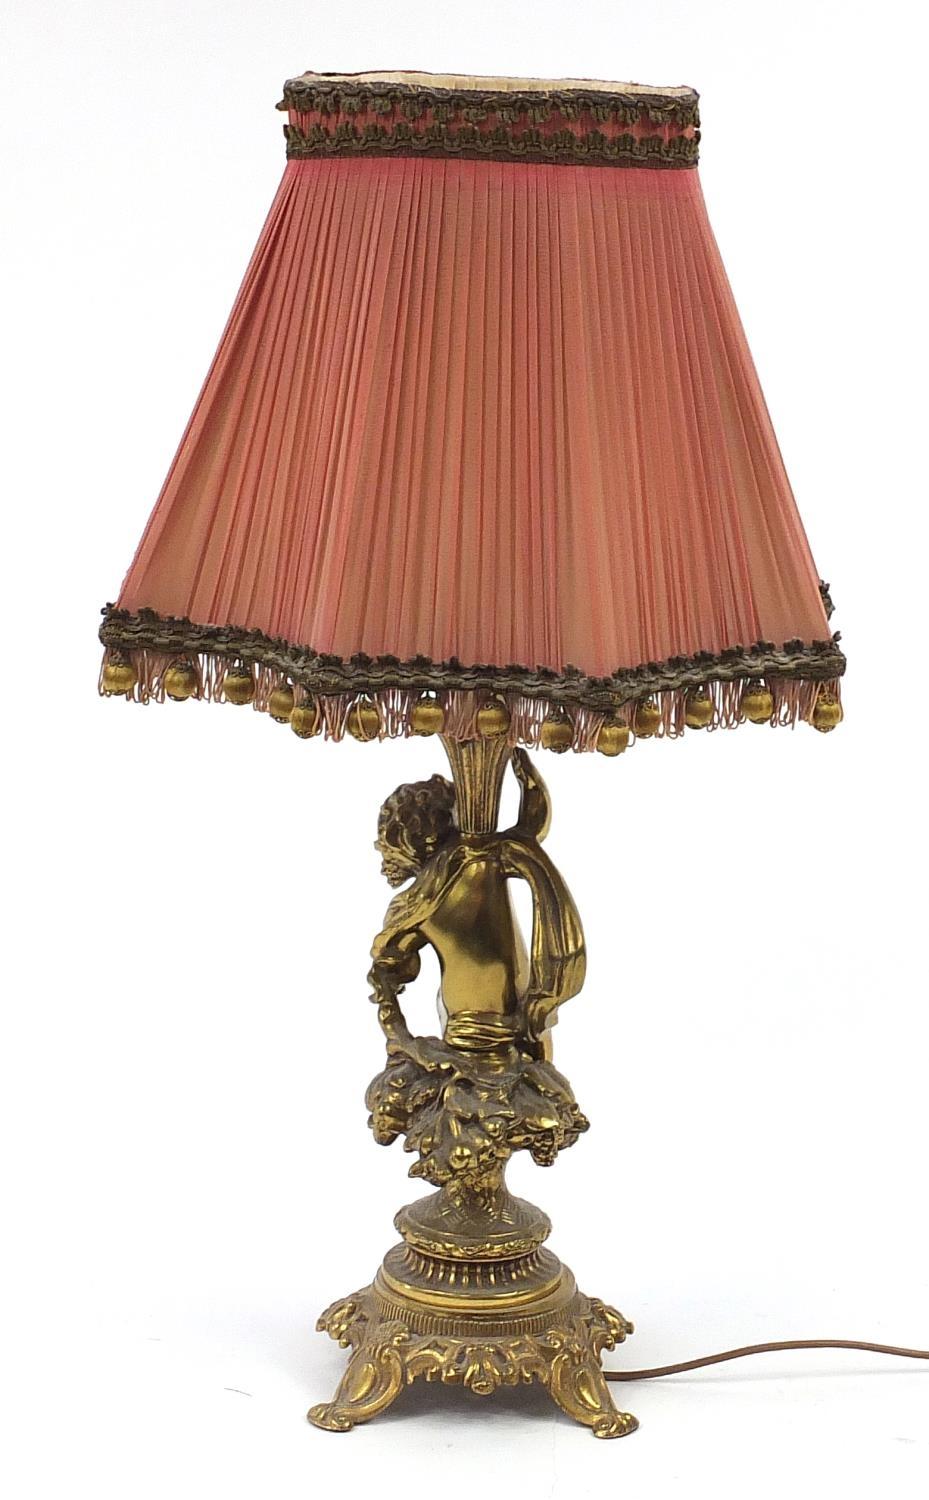 Ornate gilt metal Putti design table lamp with silk lined shade, 71cm high - Image 6 of 8